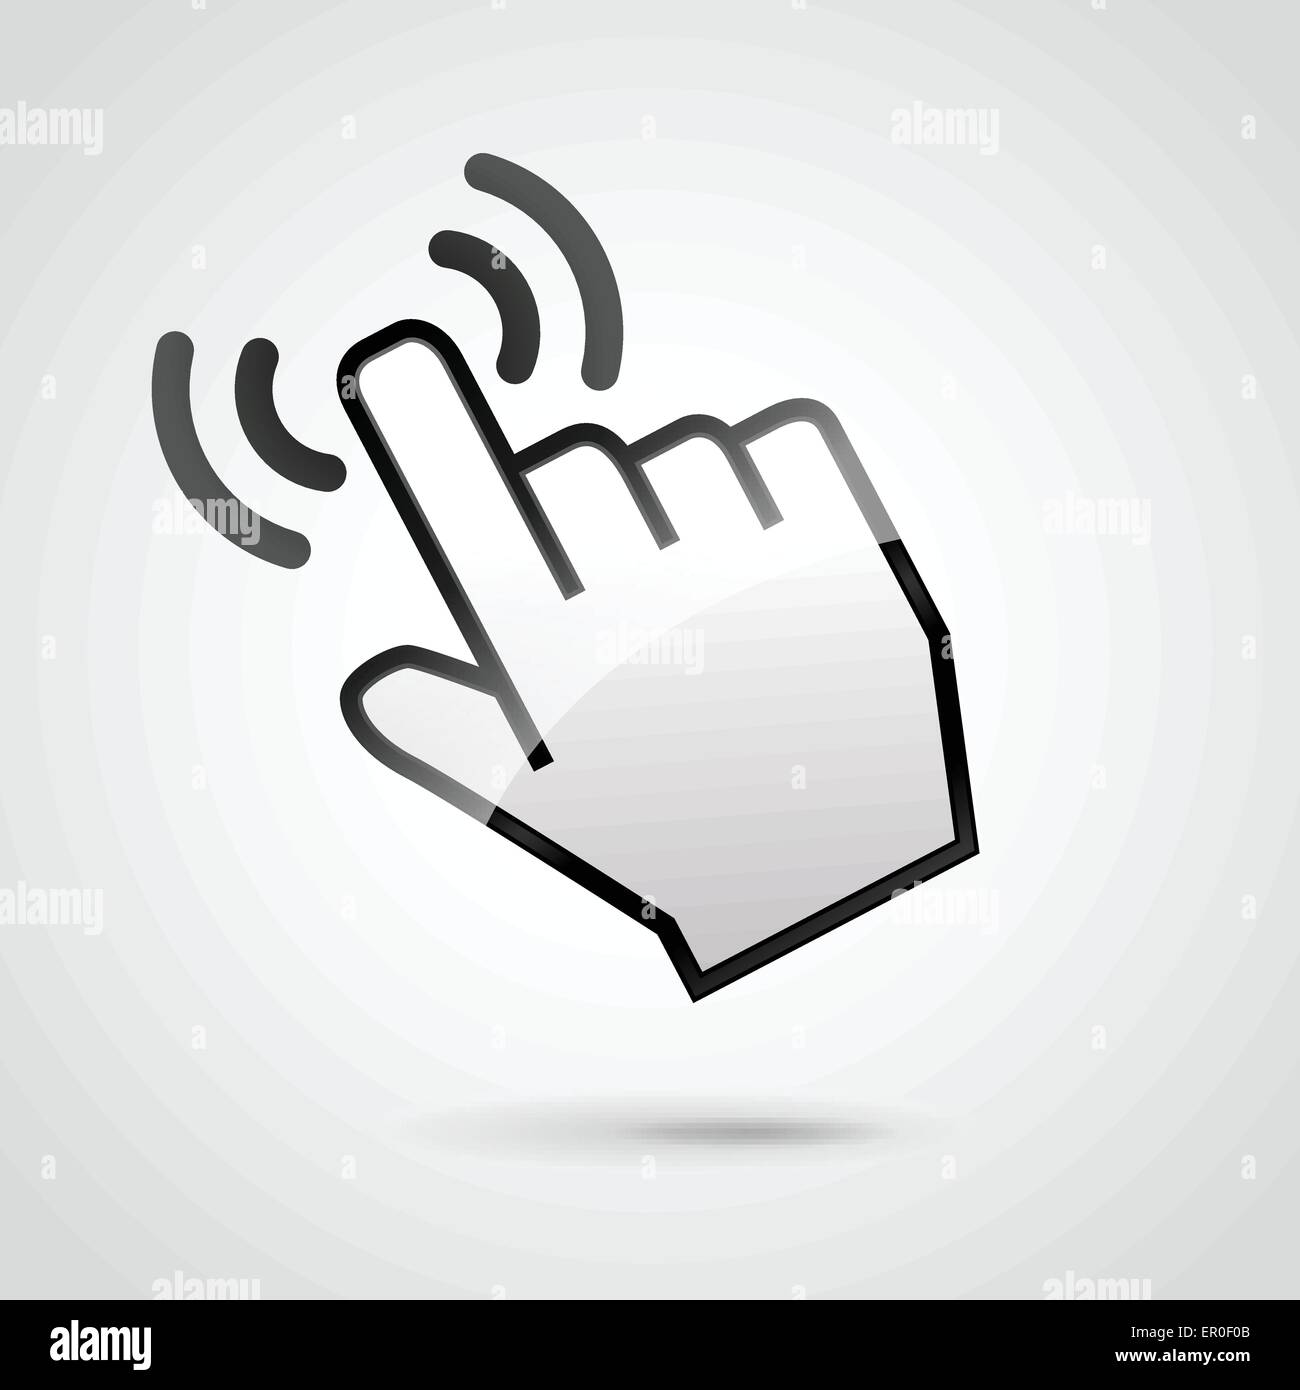 illustration of web hand for click concept Stock Vector